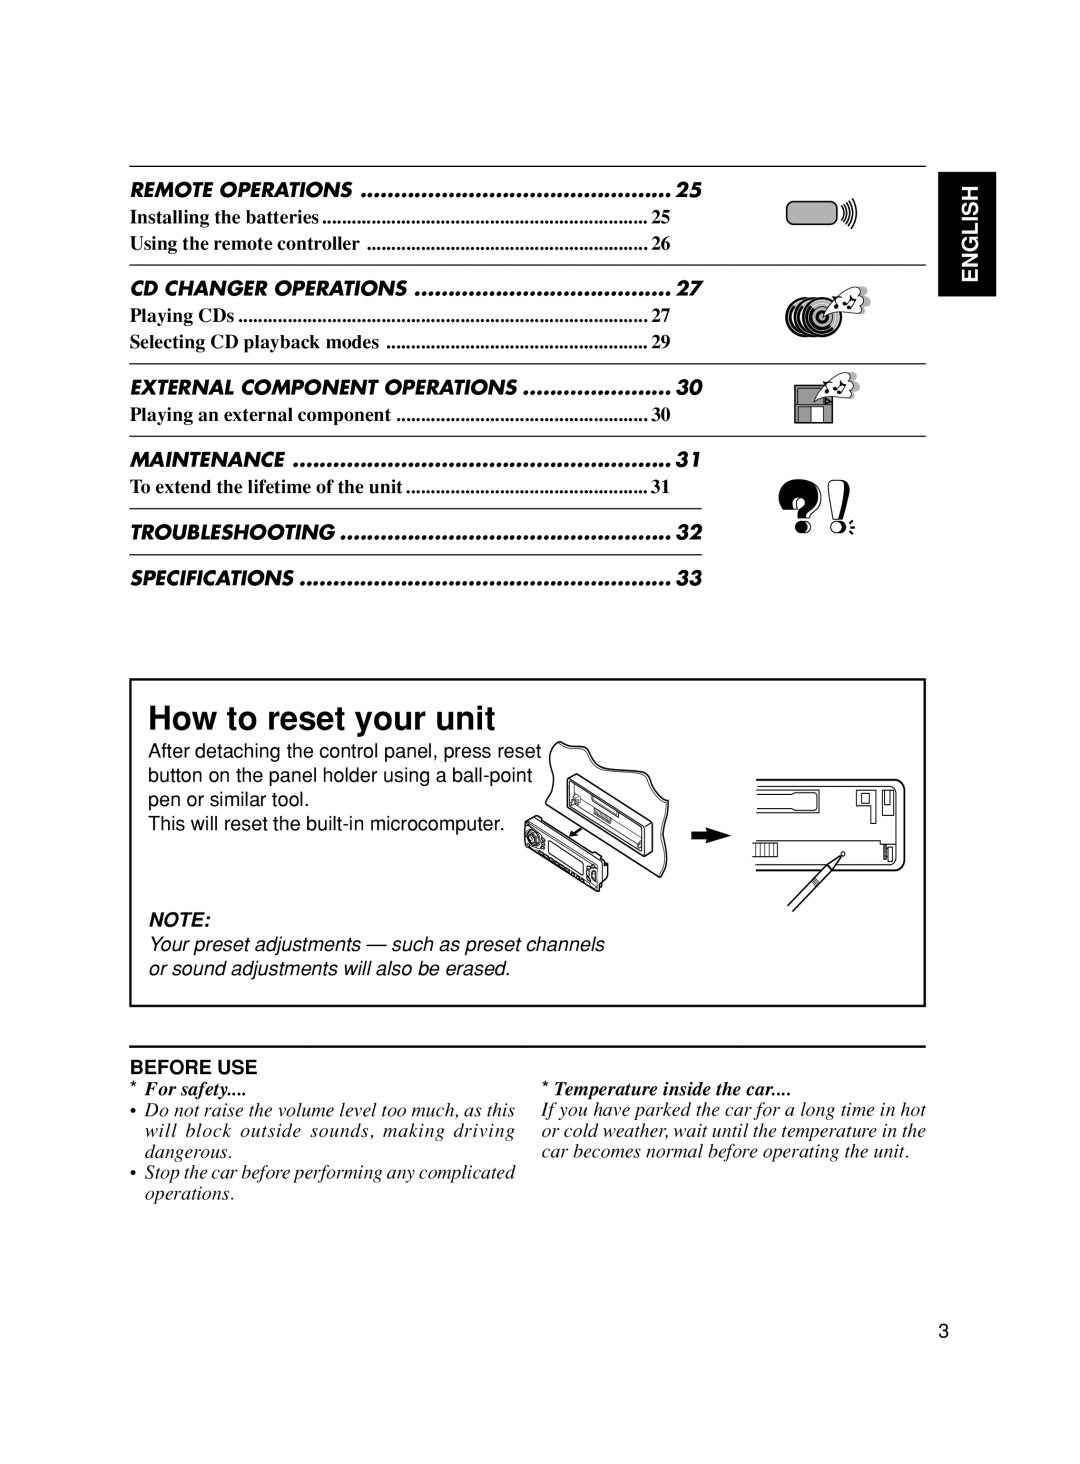 JVC KS-FX90 manual How to reset your unit, English, Before Use, For safety, Temperature inside the car 